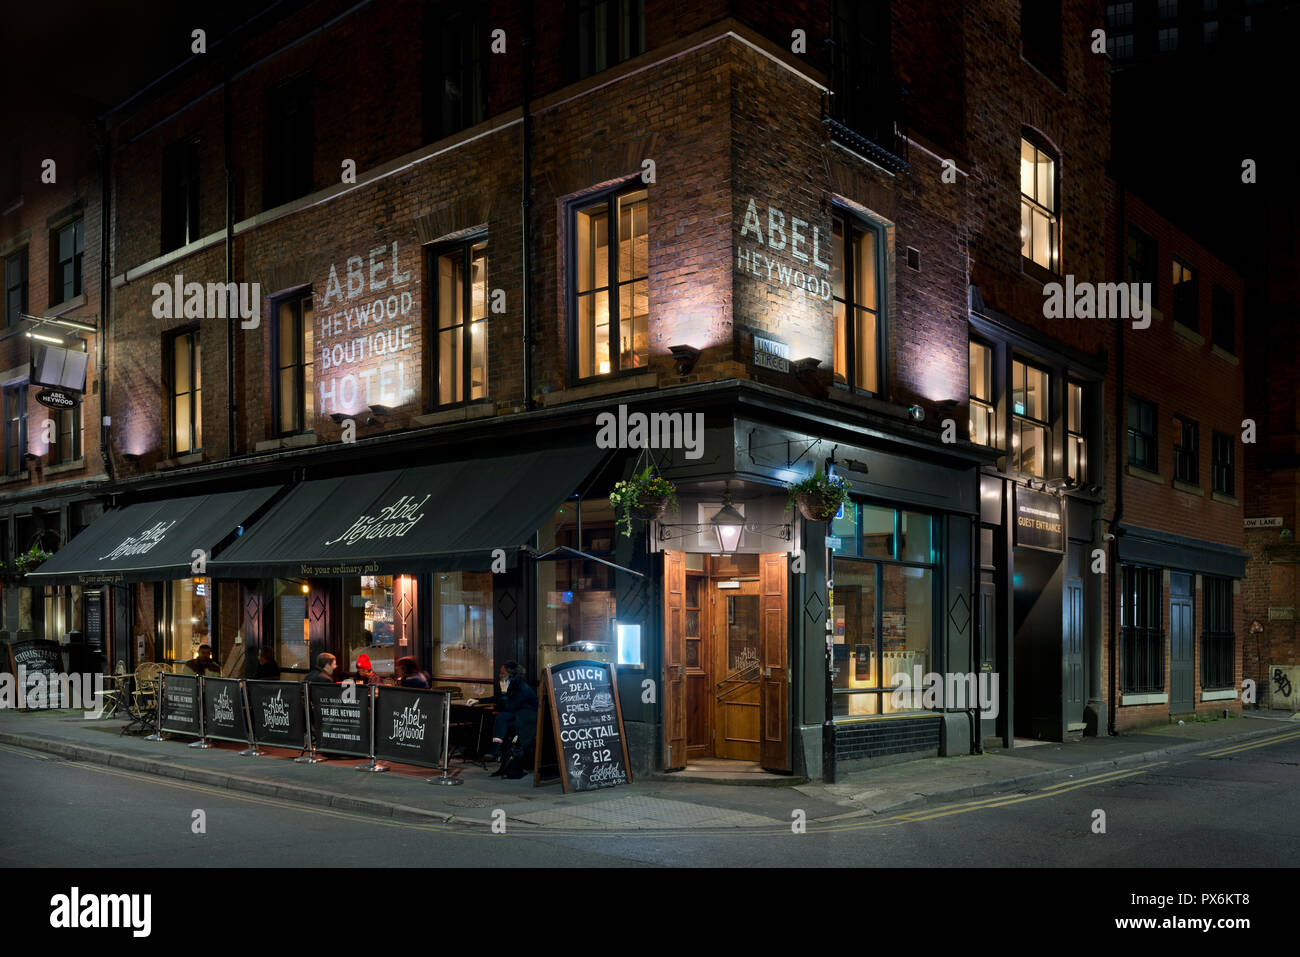 The Abel Heywood pub and hotel located on Turner Street in the Northern Quarter area of Manchester city centre, UK. Stock Photo